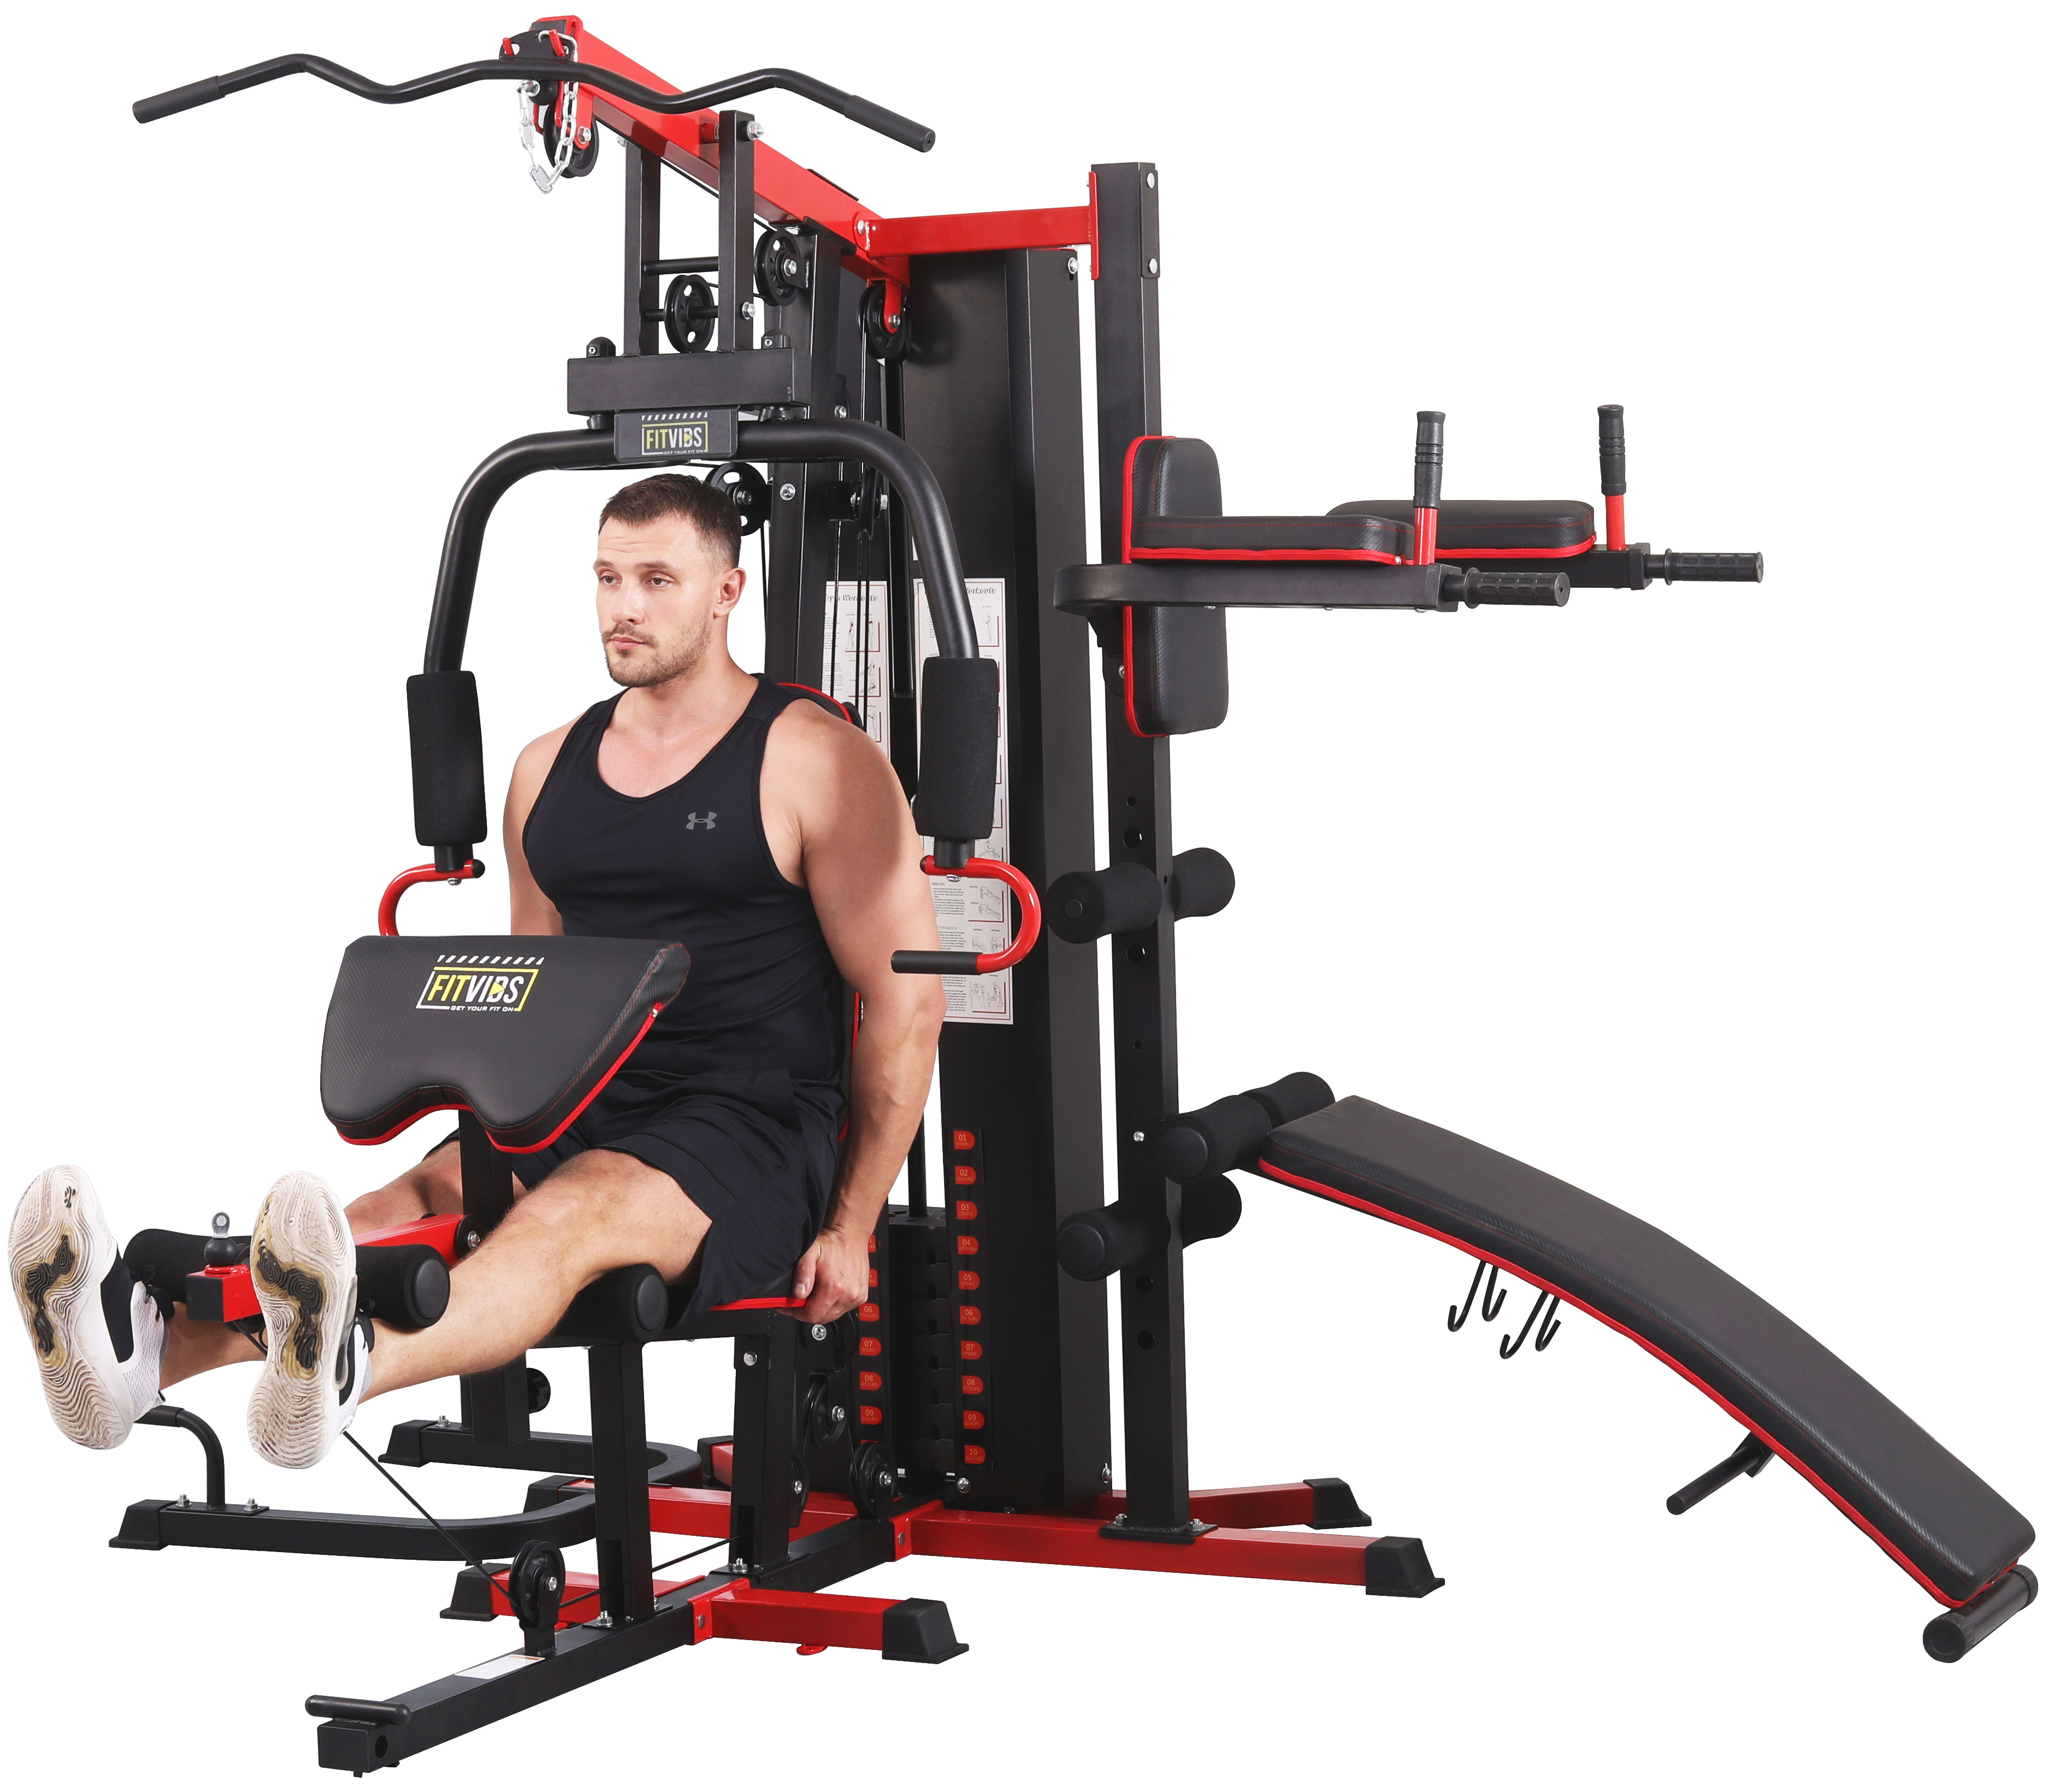 Fitvids LX900 Home Gym System Workout Station with 330 Lbs of Resistance, 122.5 Lbs Weight Stack, Three Station, Comes with Installation Instruction Video, Ships in 7 Boxes - image 5 of 13